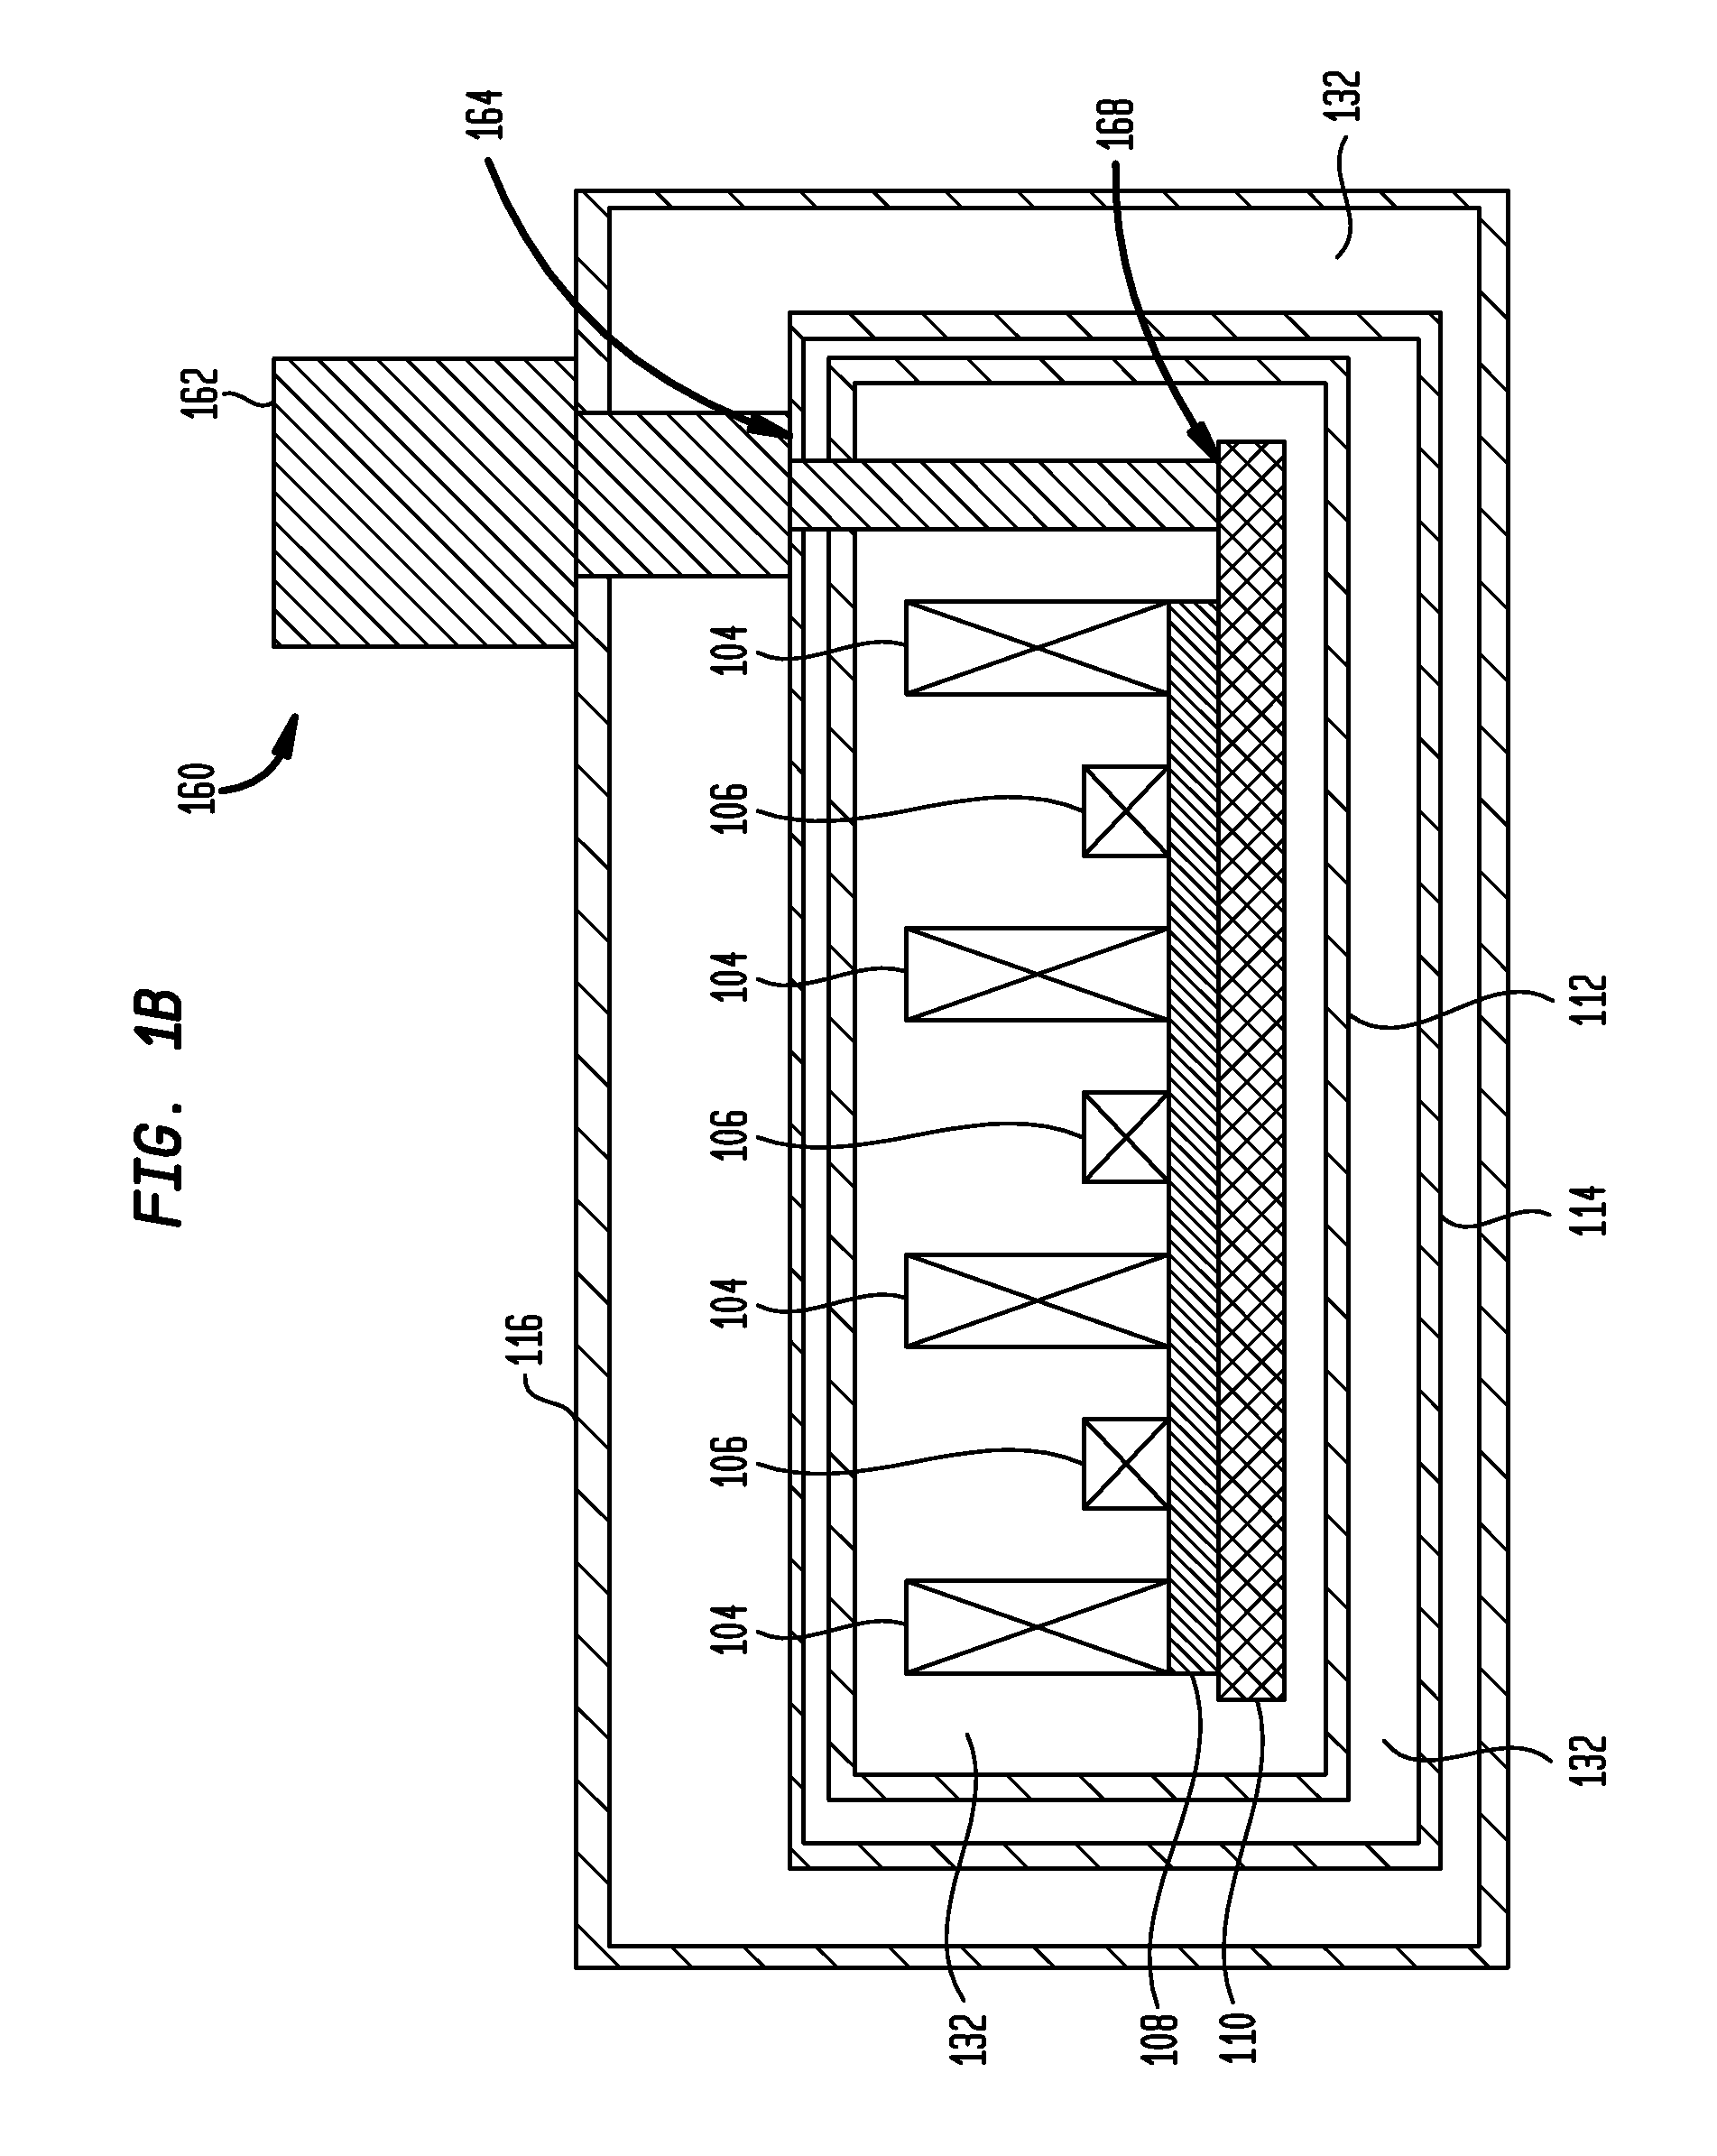 Superconductor Magnetic Resonance Imaging System and Method (SUPER-MRI)